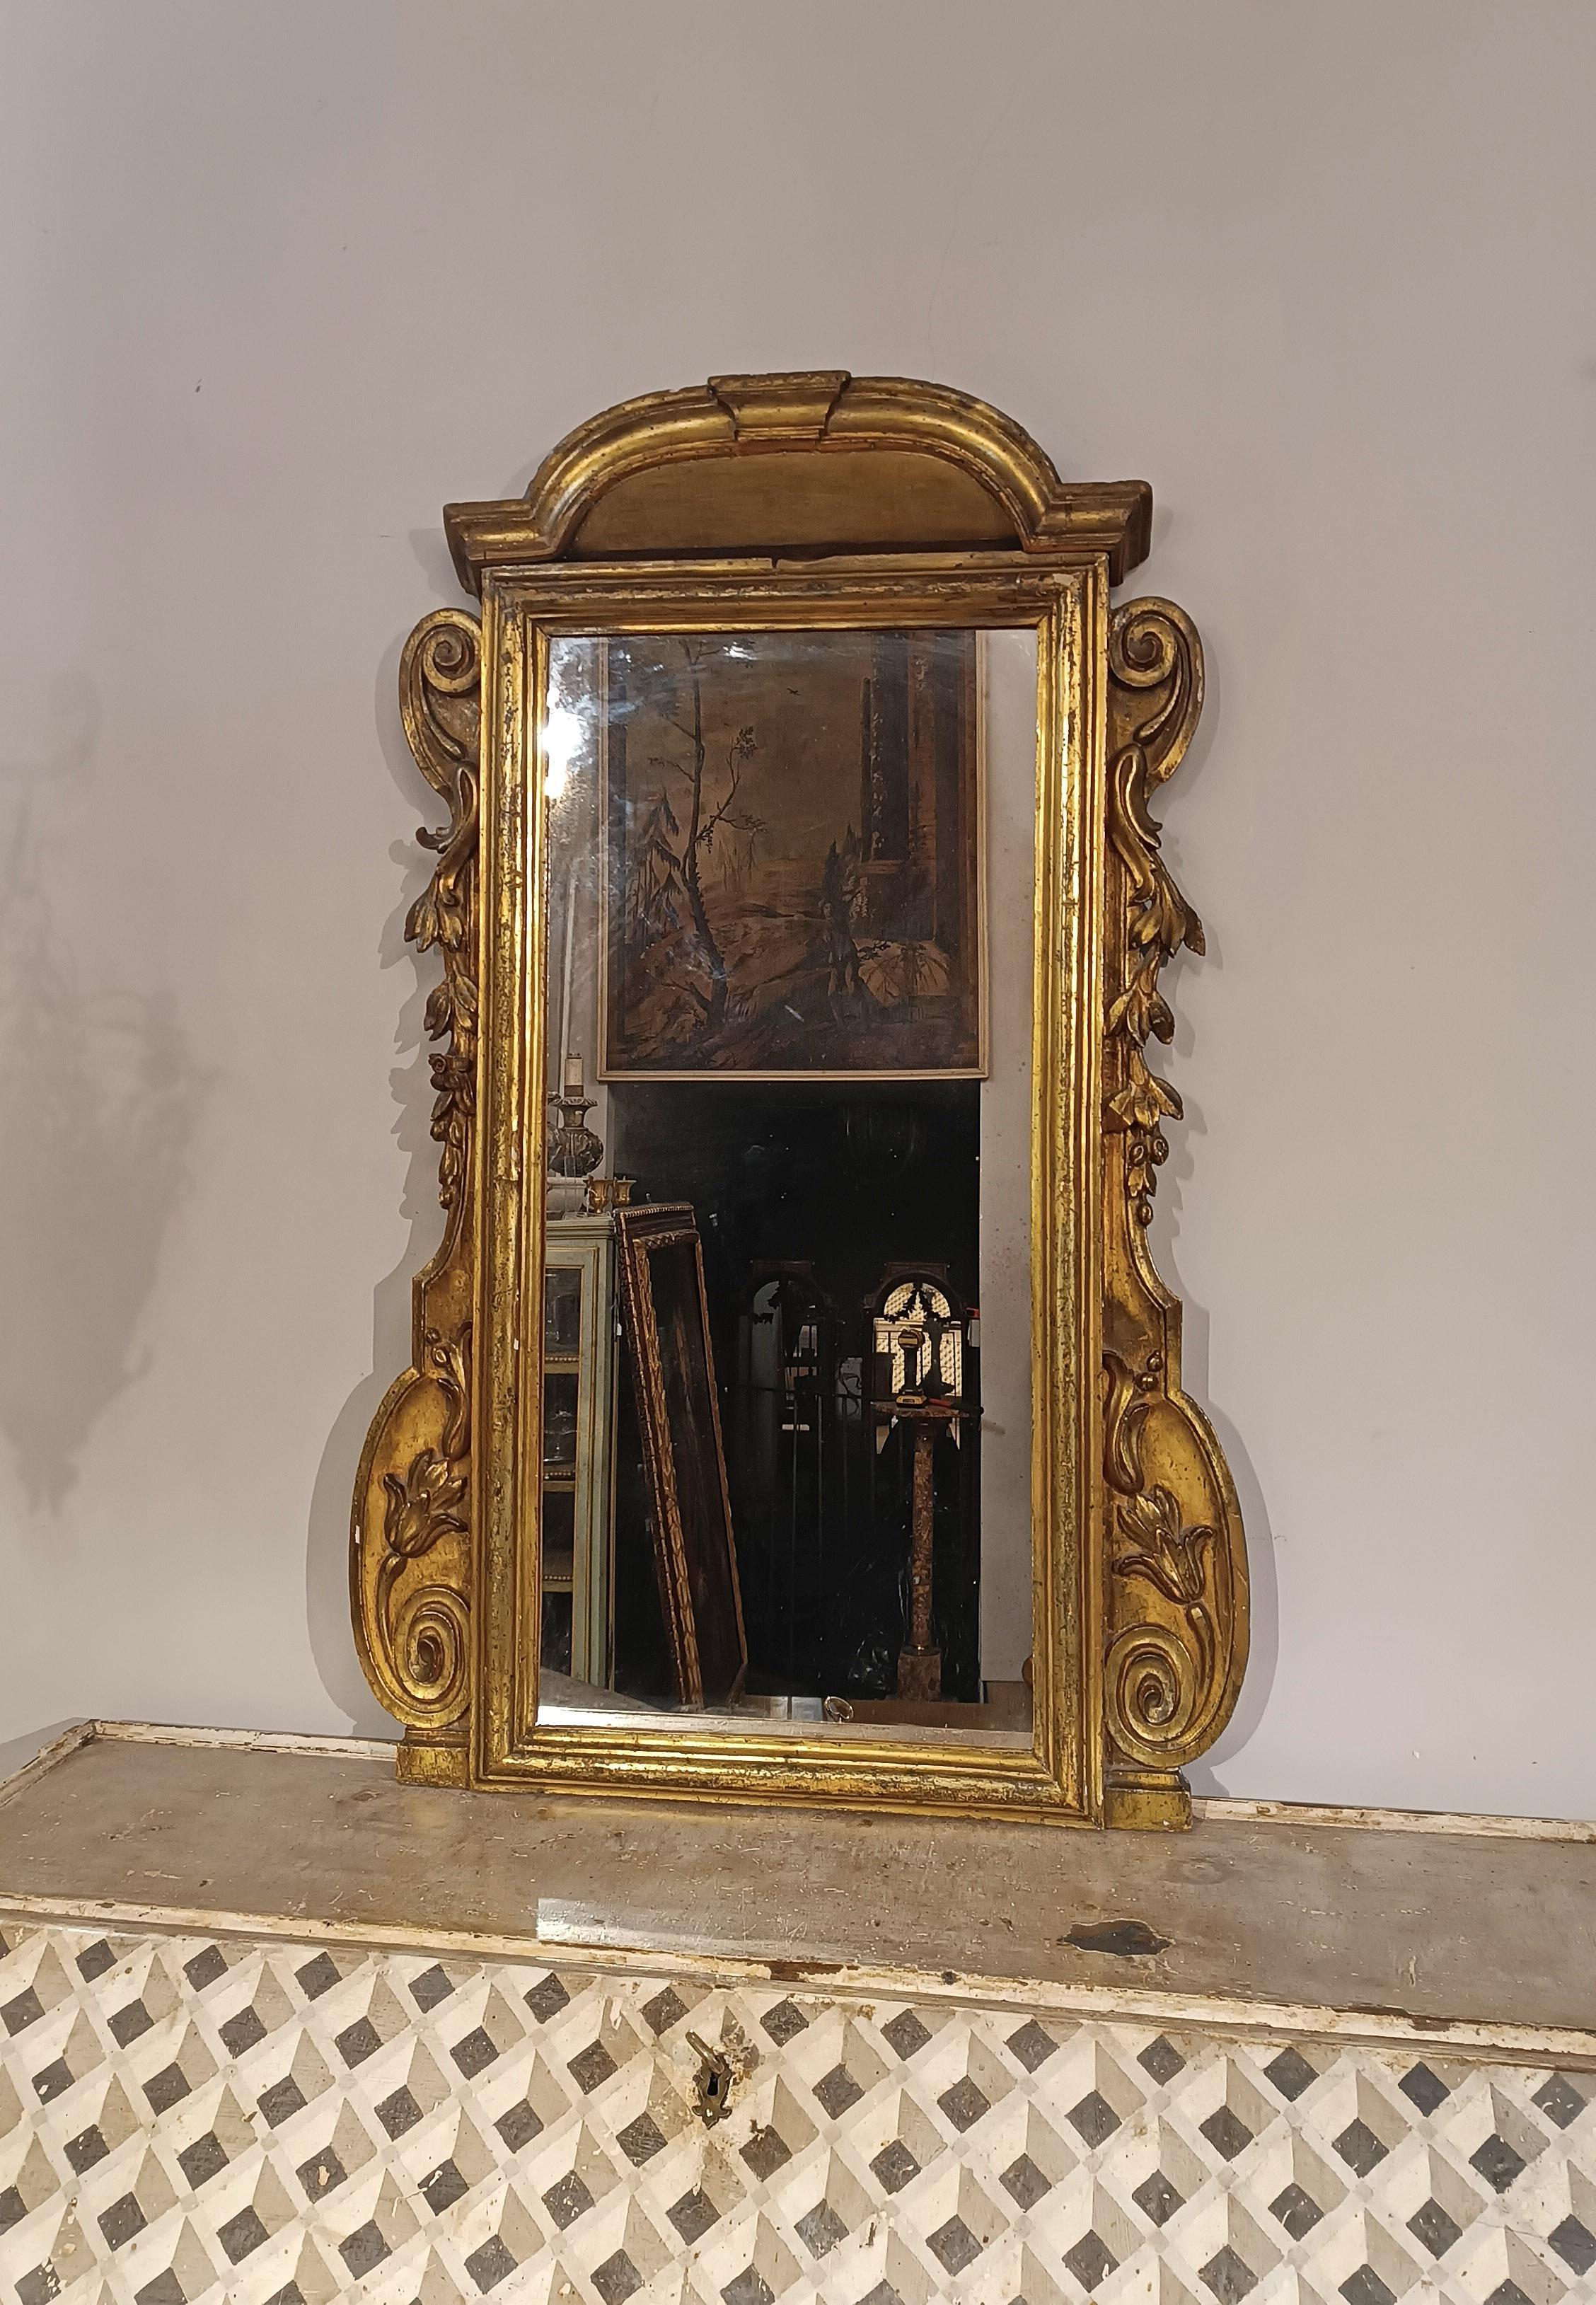 SECOND HALF OF THE 18th CENTURY SMALL MIRROR IN GOLDEN WOOD  For Sale 3